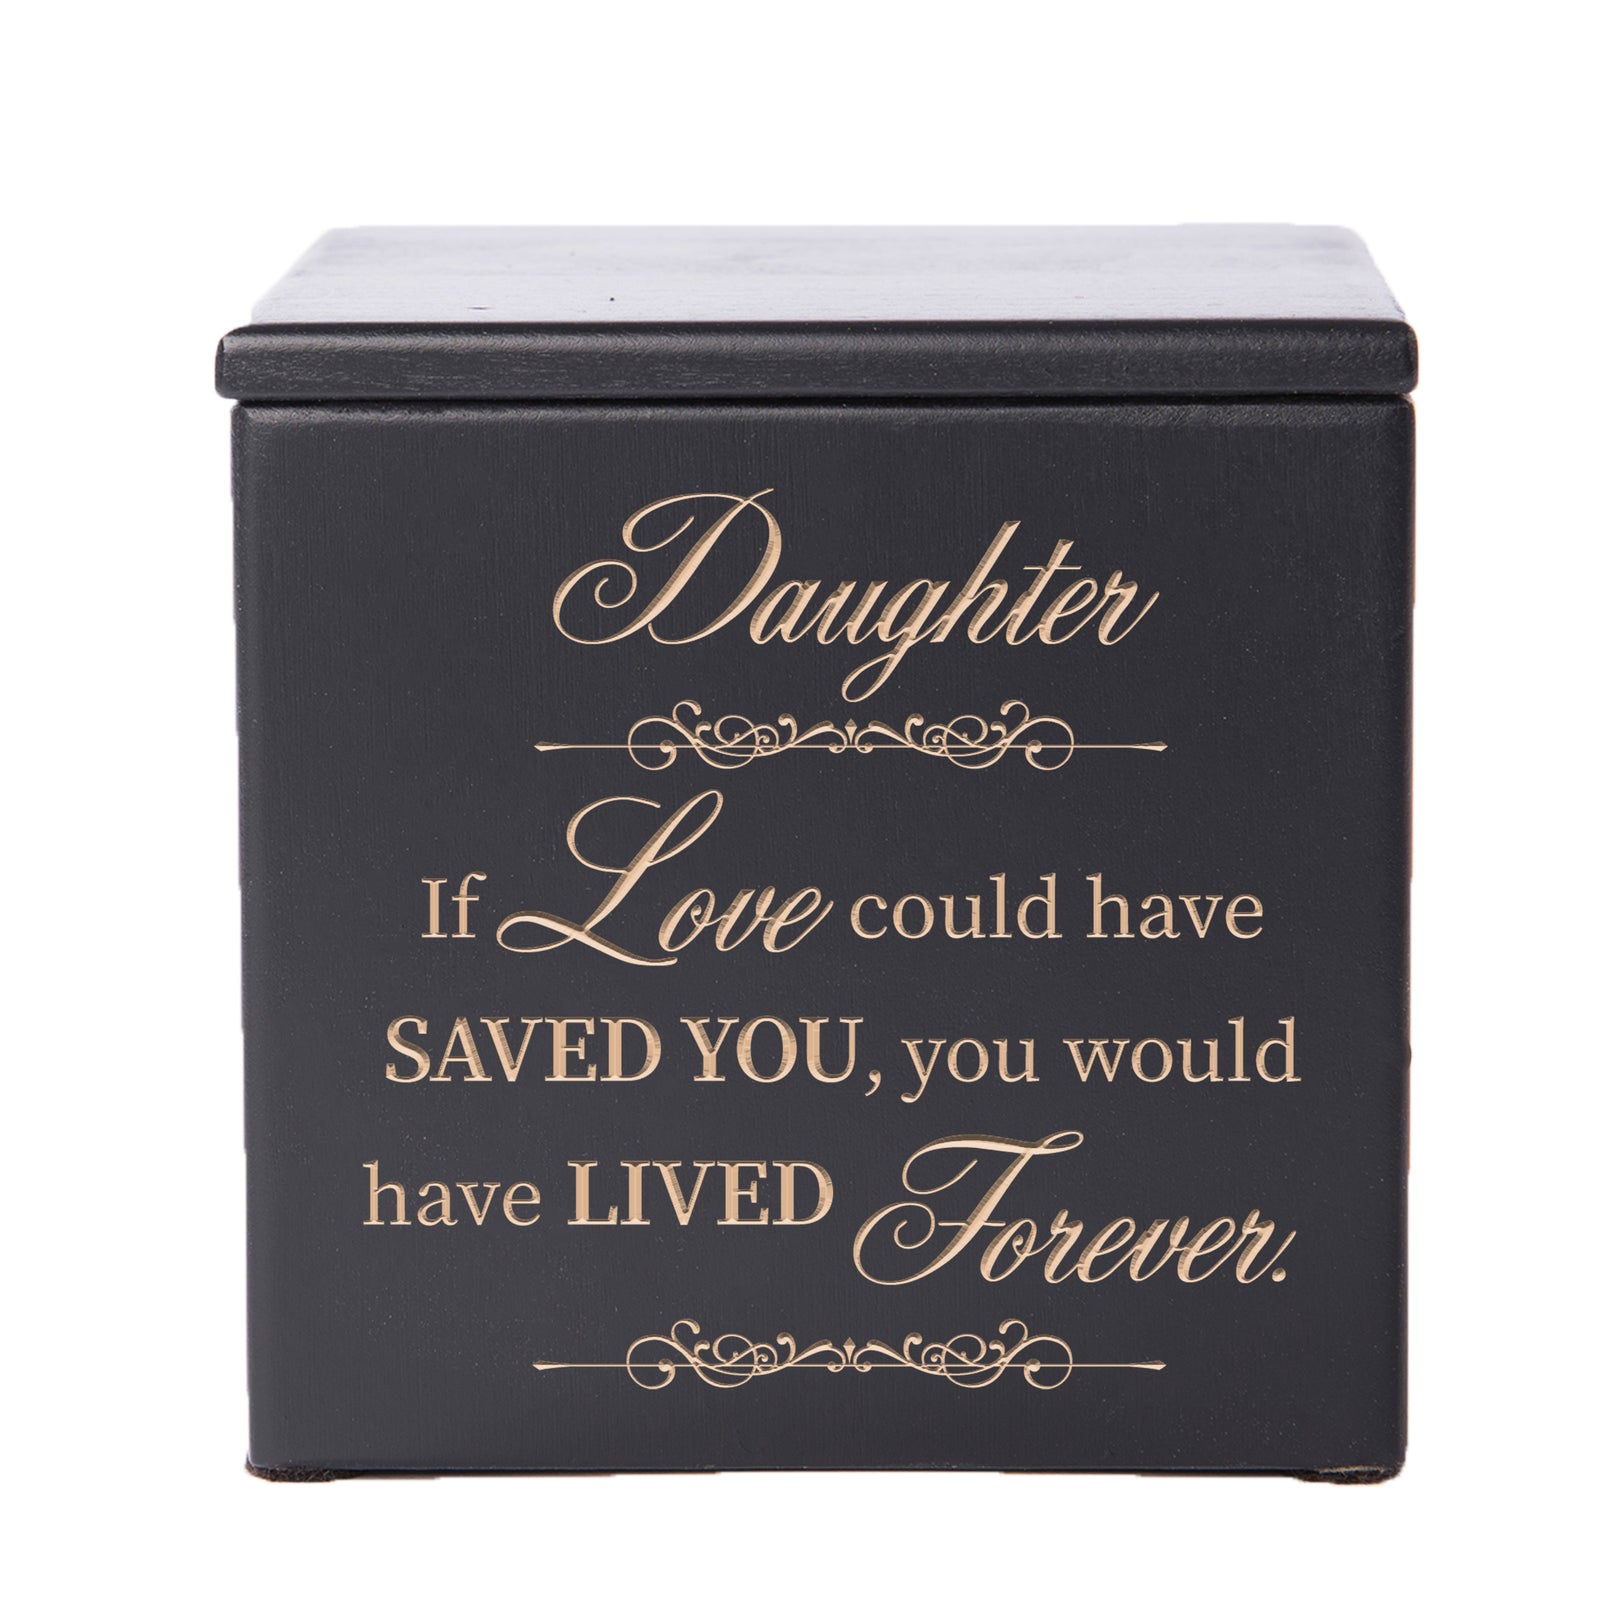 Wooden Memorial Cremation Urn Keepsake Box for Human or Pet Ashes - If Love Could, Daughter